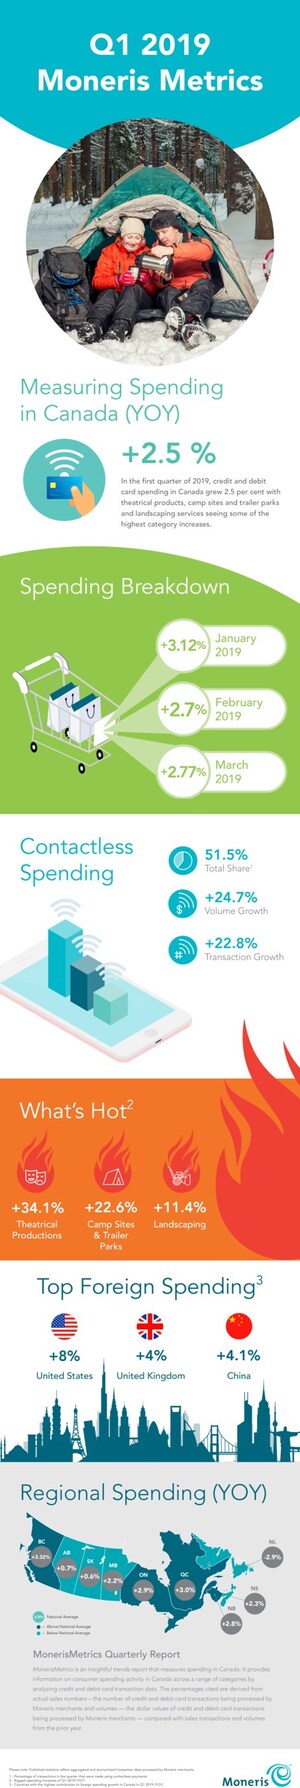 More than half of all Q1 card present transactions were contactless